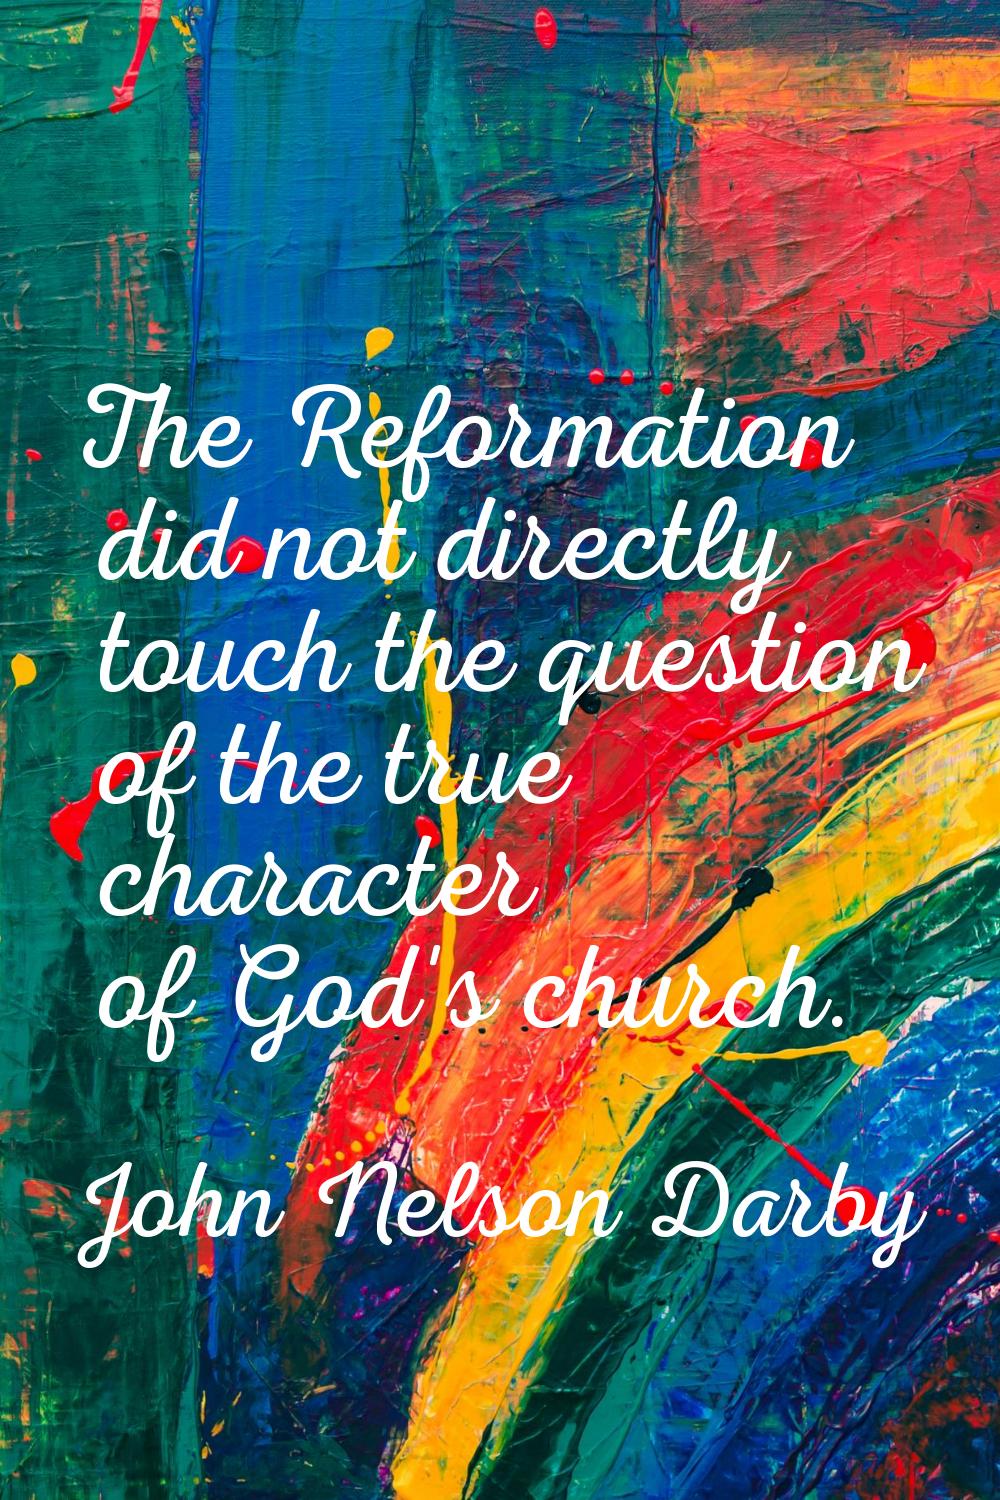 The Reformation did not directly touch the question of the true character of God's church.